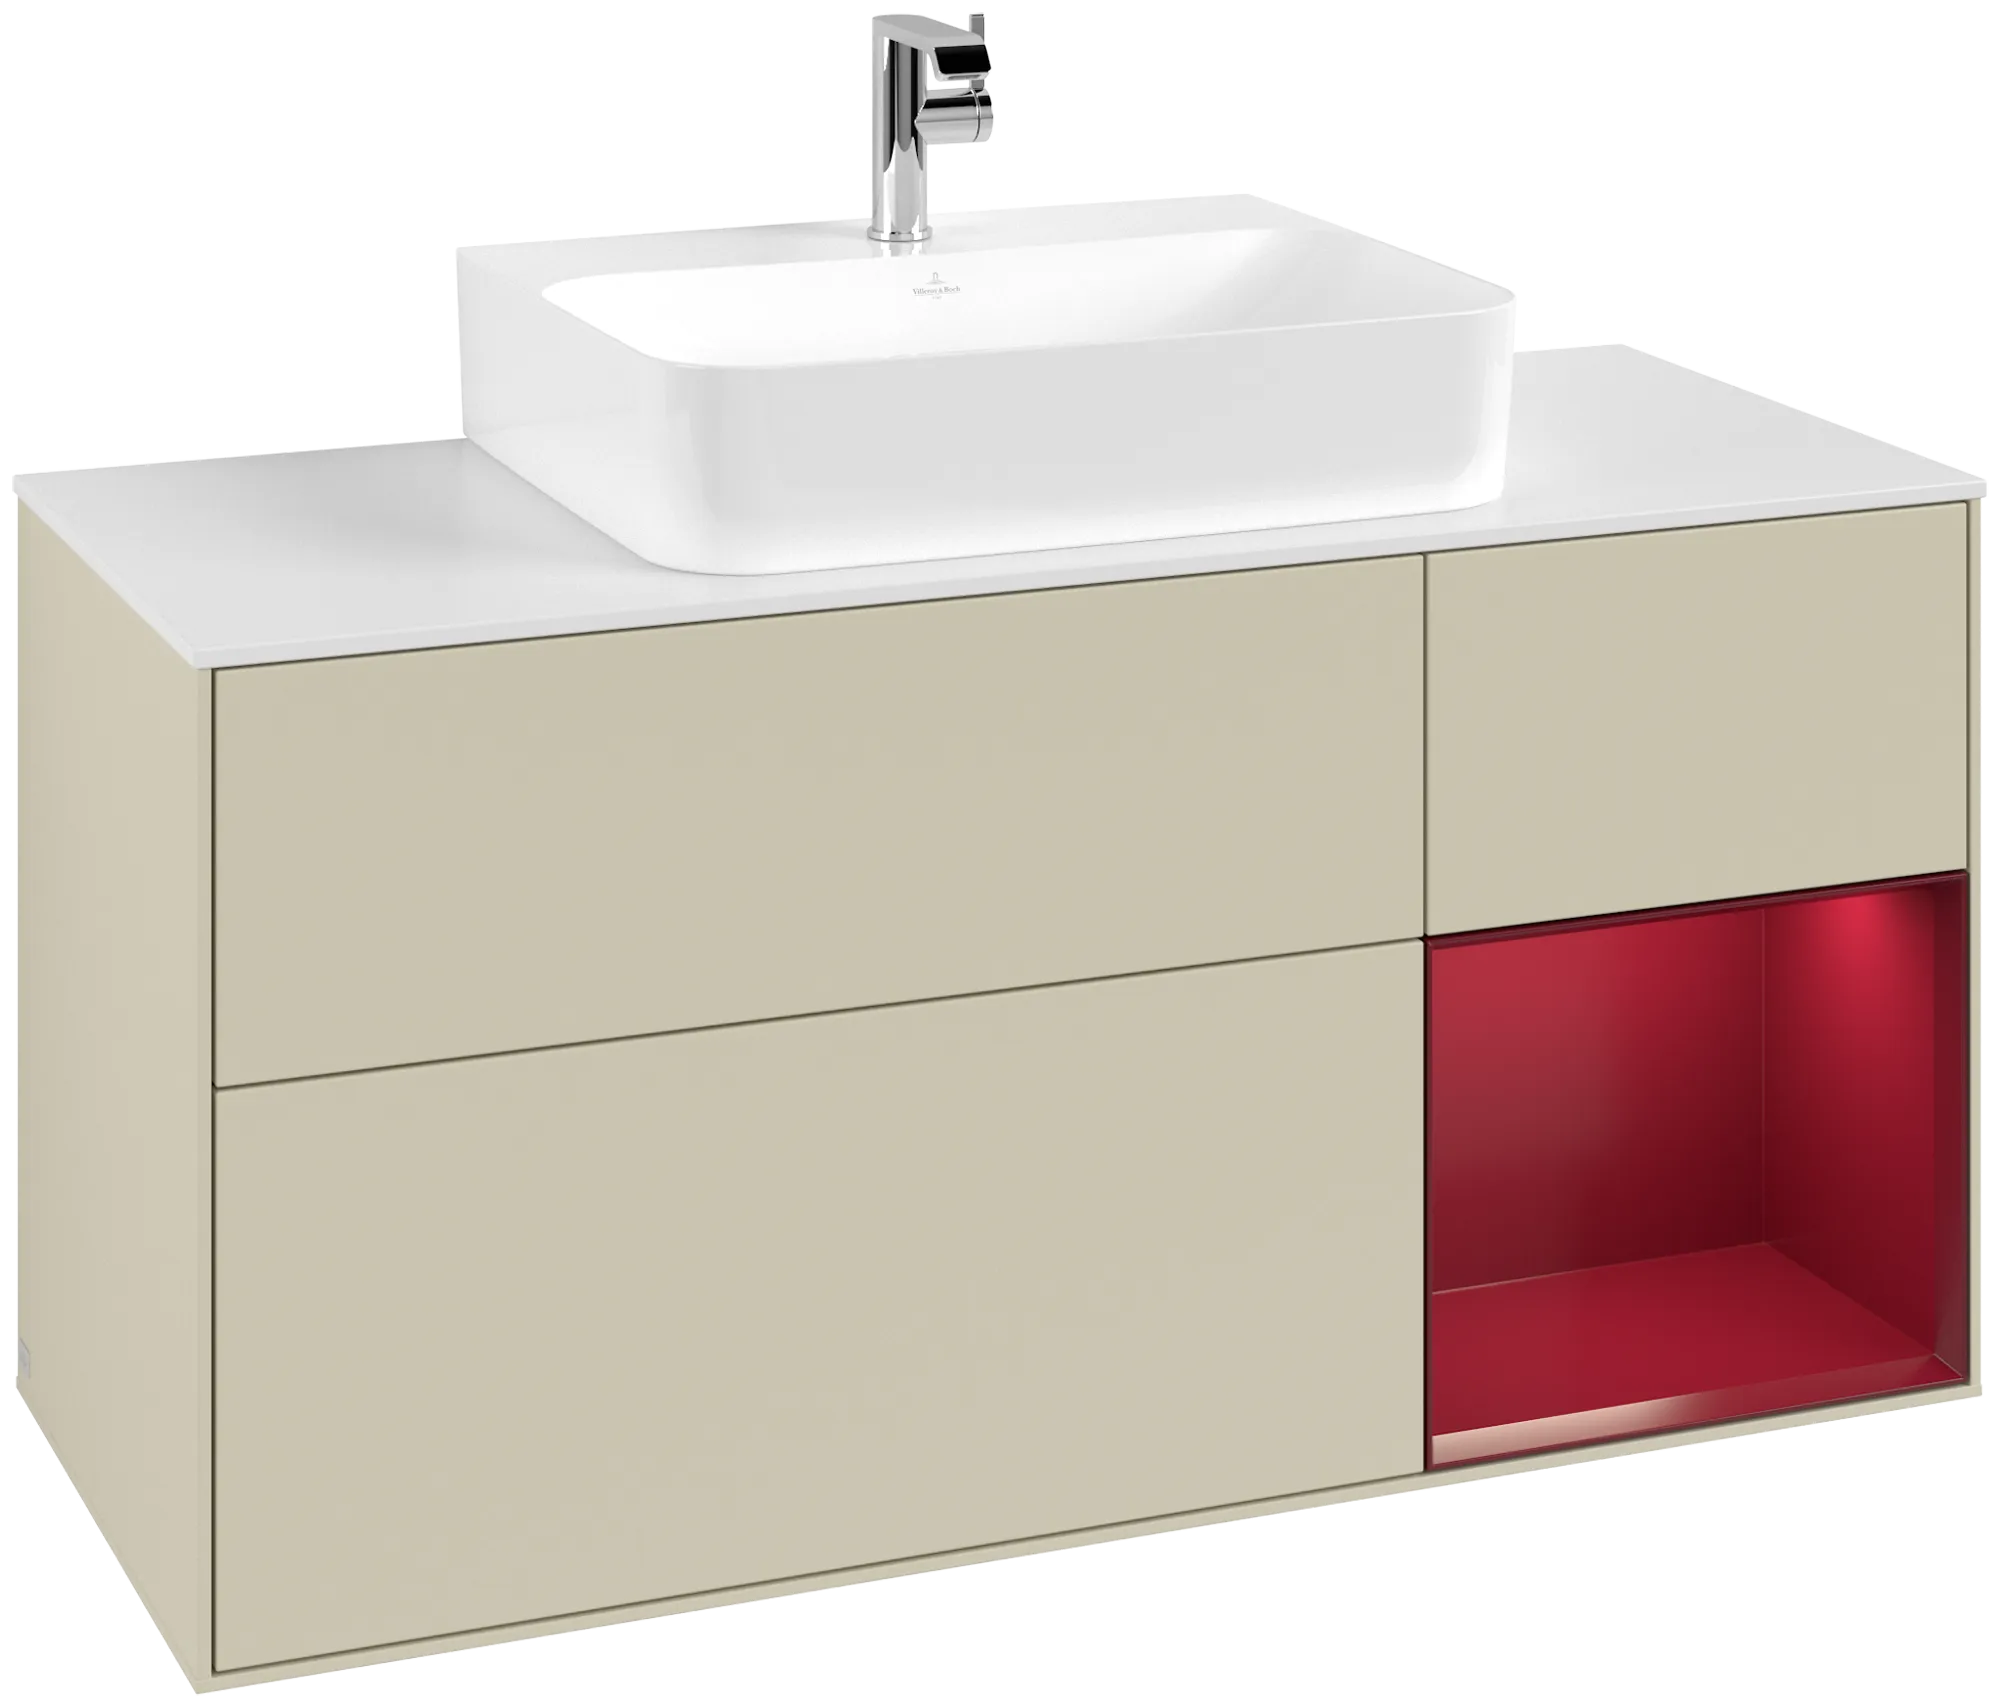 Picture of VILLEROY BOCH Finion Vanity unit, with lighting, 3 pull-out compartments, 1200 x 603 x 501 mm, Silk Grey Matt Lacquer / Peony Matt Lacquer / Glass White Matt #G171HBHJ